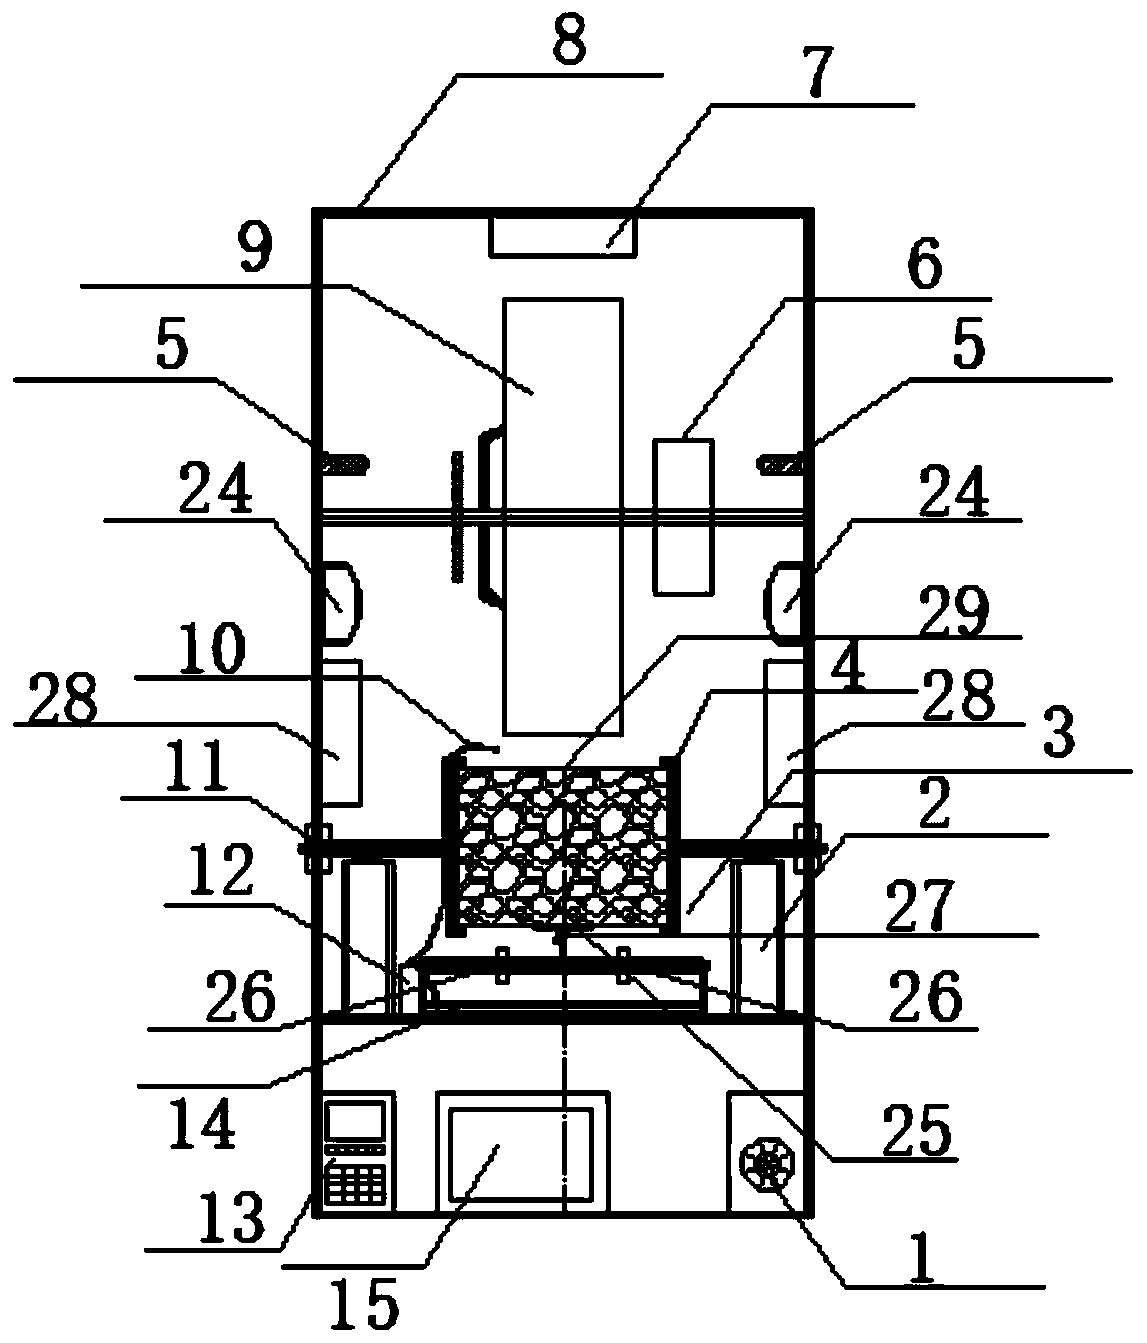 An accelerated loading device and method for indoor testing of pavement materials